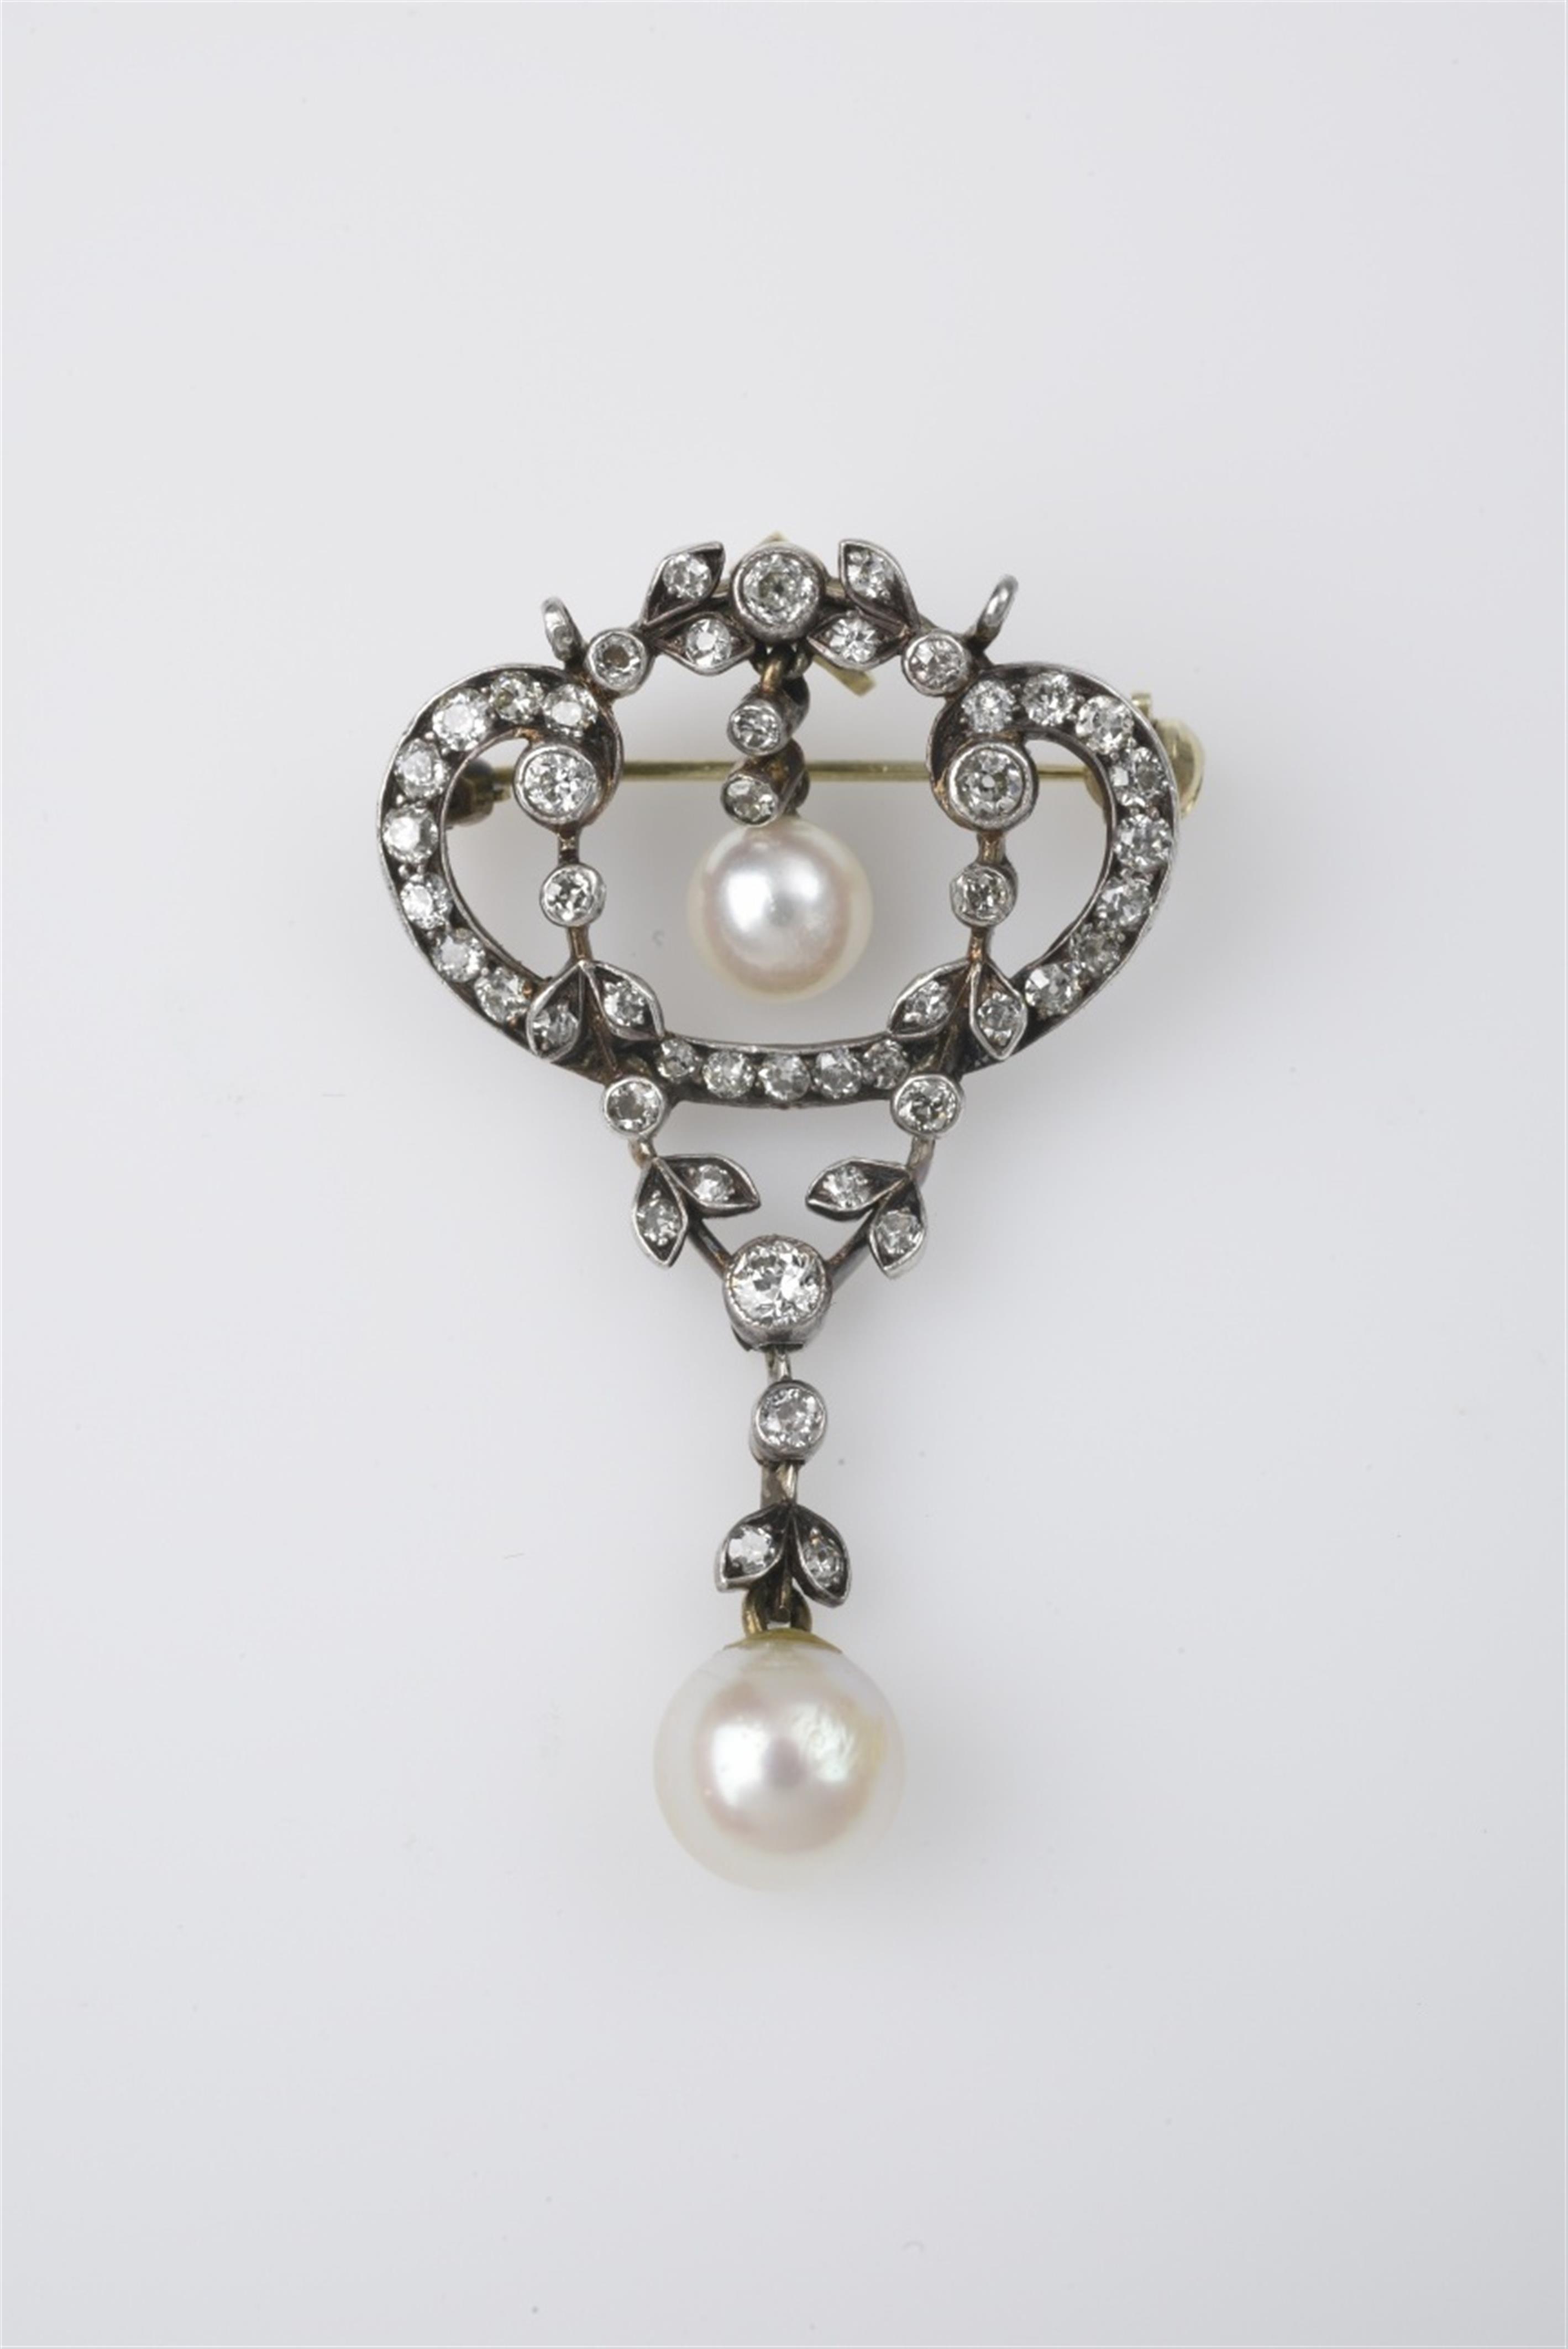 A 14k gold, silver, and diamond pendant brooch - image-1